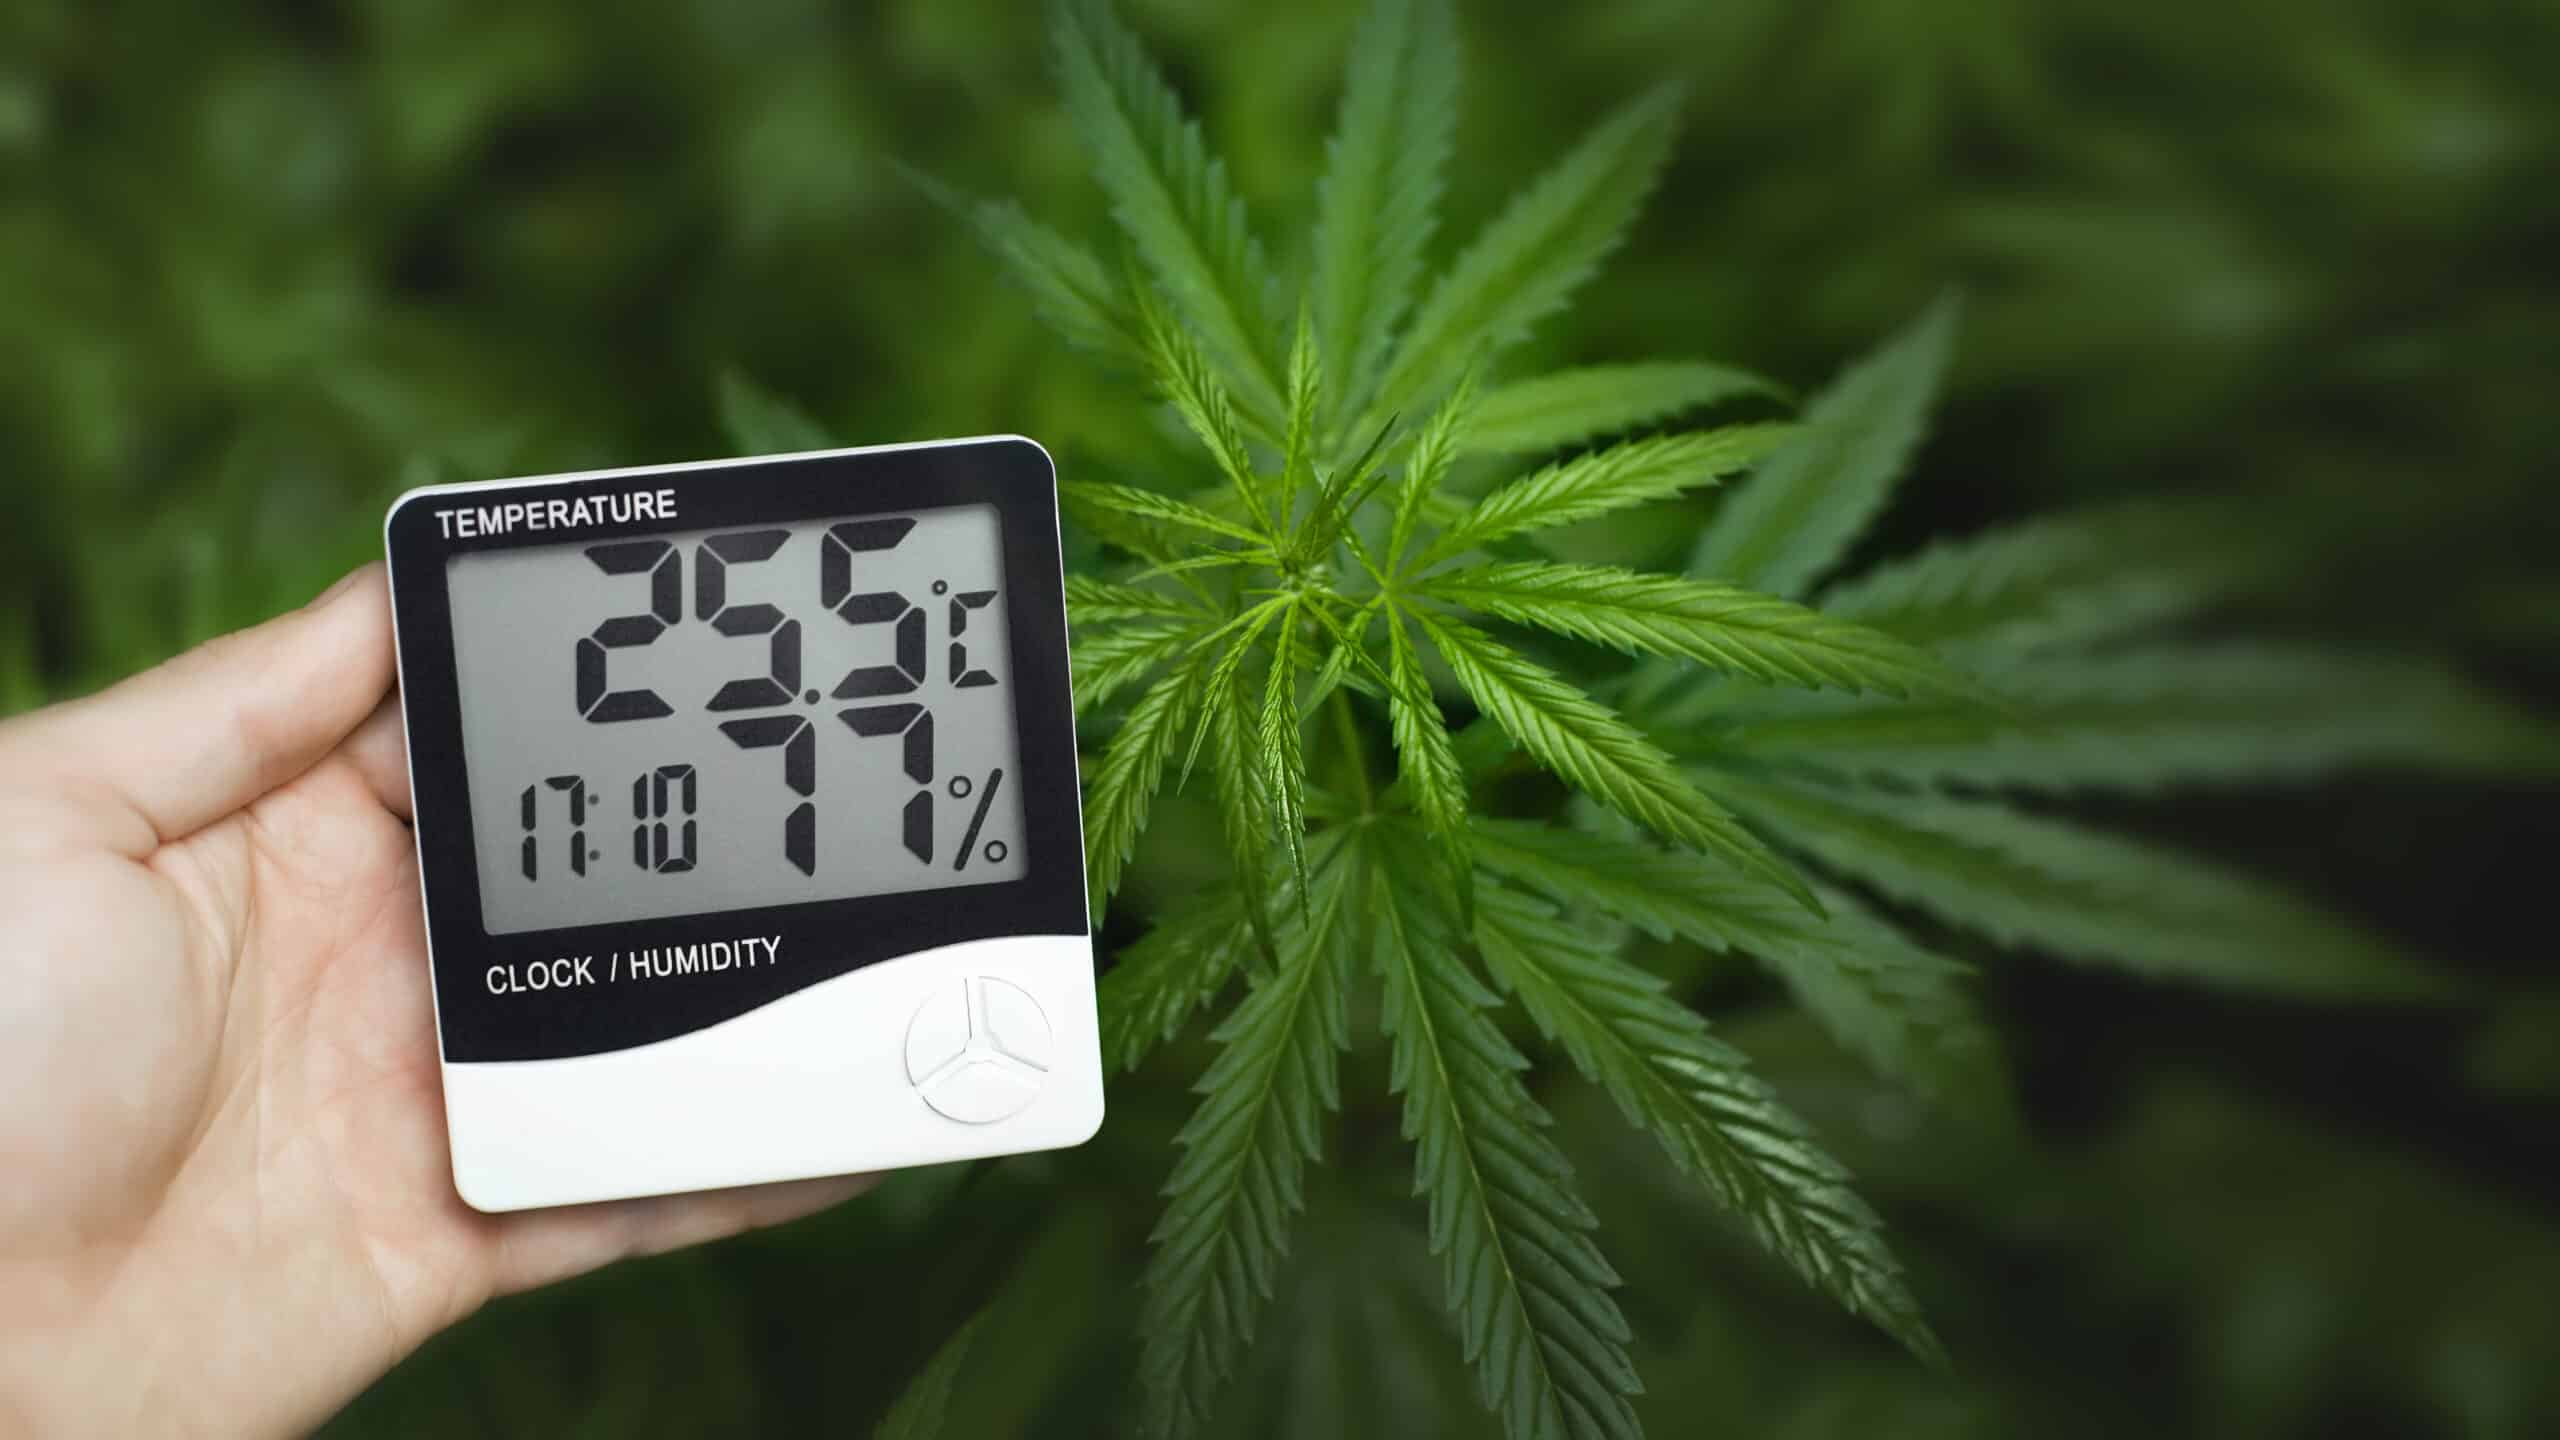 Cannabis cultivation technology includes this IoT humidity sensor and hygrometer showing value and temperature. The sensor is shown in hand in front of a cannabis plant